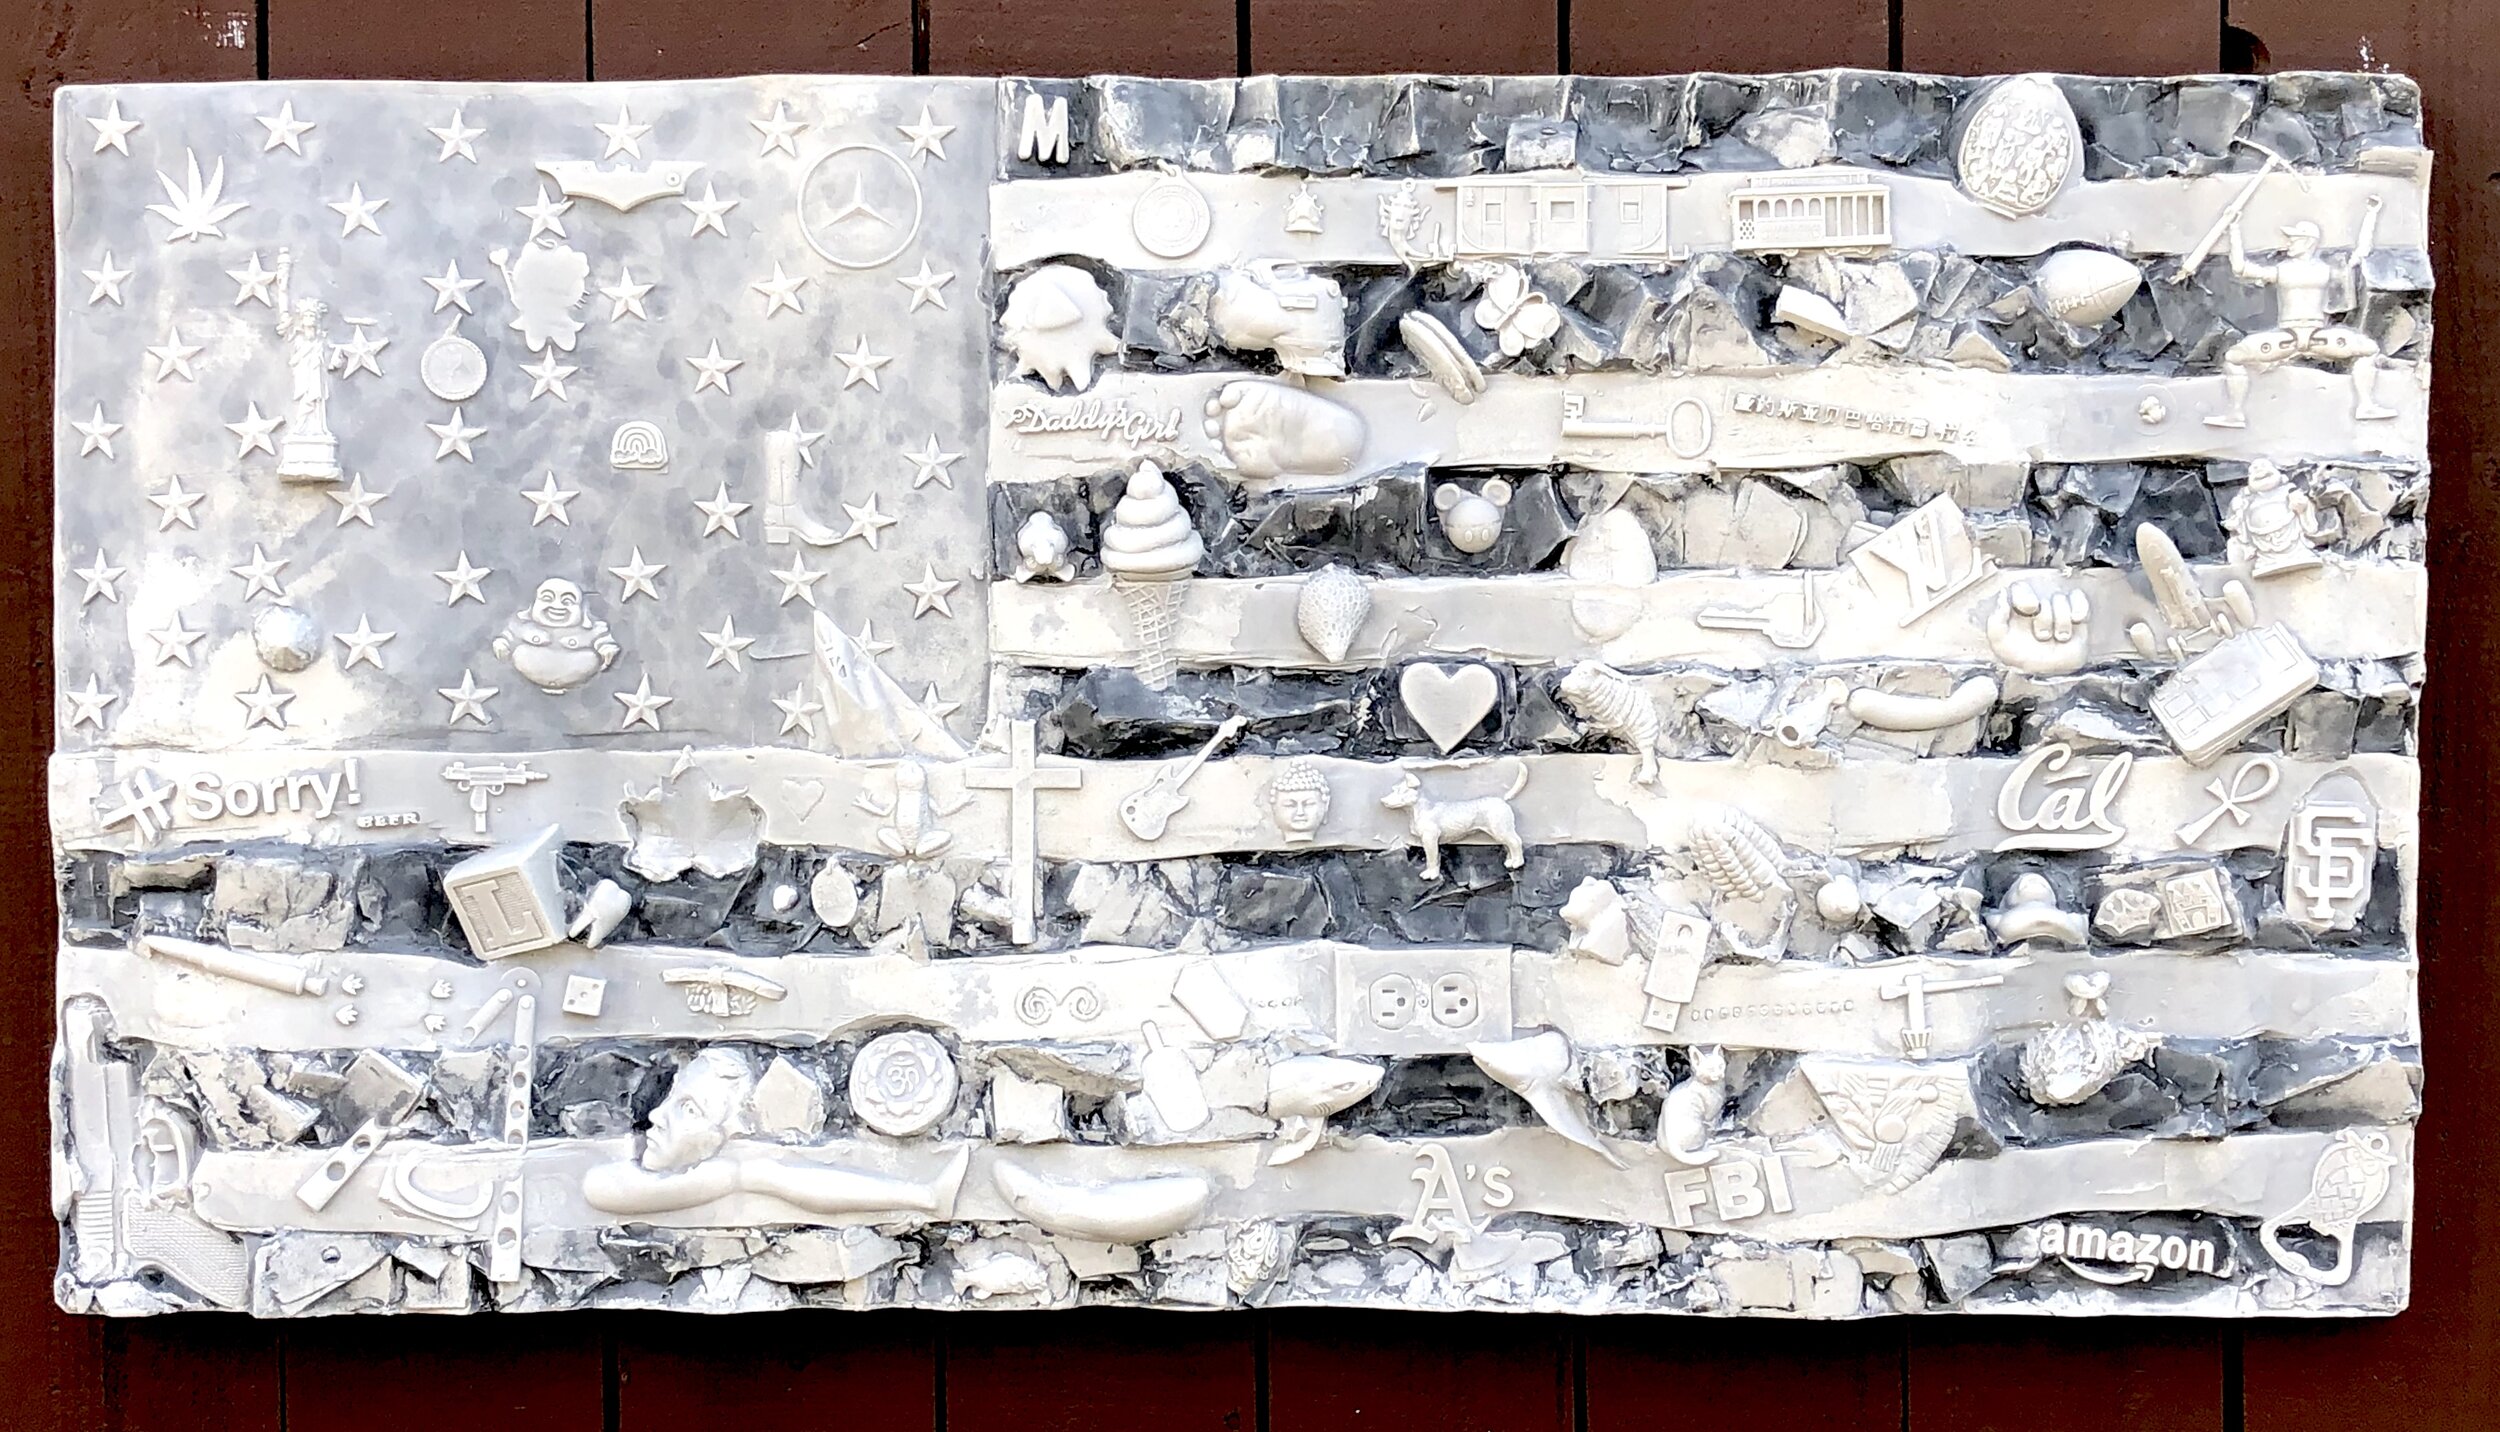  Shared Spaces Berkeley CA- August 2019, 21 x 40 x4”, Hydrocal and Carrara marble 